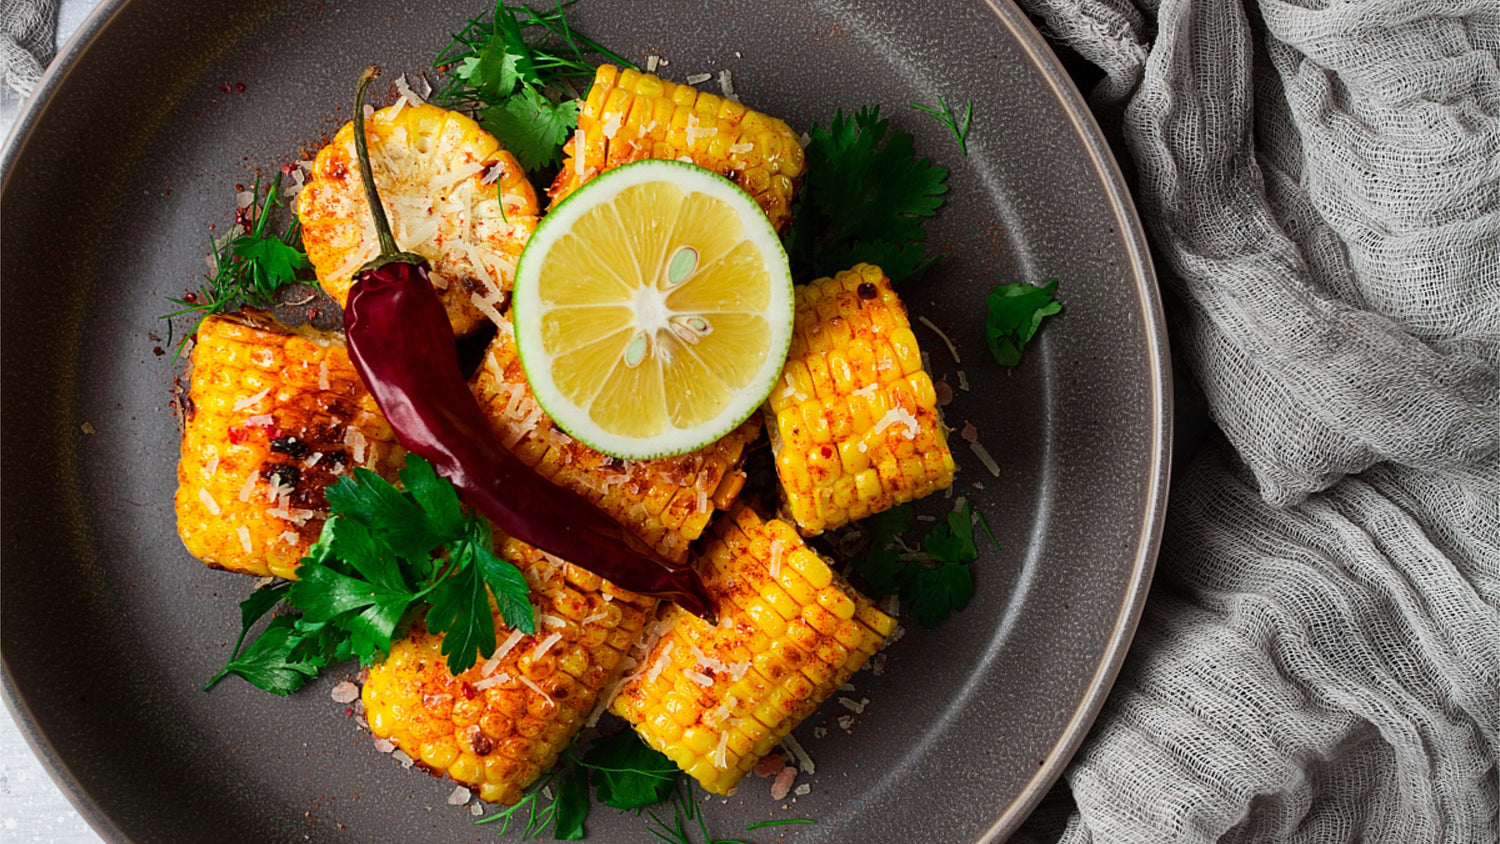 Grilling corn on the cob is a timeless favorite, and with the X&E Indoor Smokeless Grill, you can enjoy it all year round without any smoke or hassle.